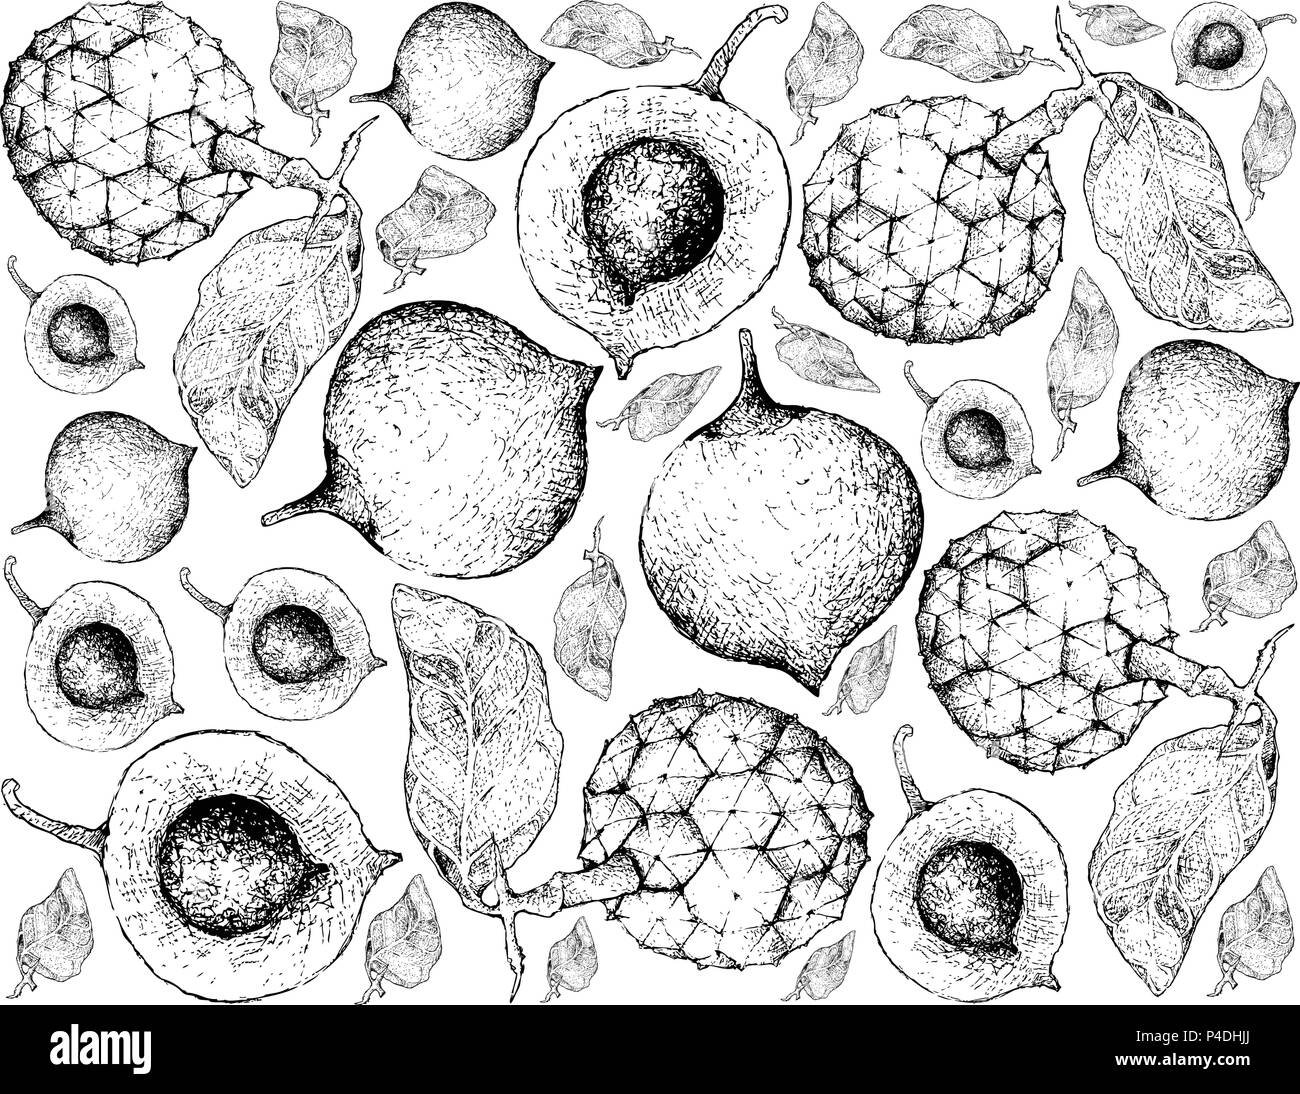 Tropical Fruits, Illustration Wallpaper Background of Hand Drawn Sketch of Fresh False Mangosteen or Garcinia Cochinchinensis and Araticum or Duguetia Stock Vector